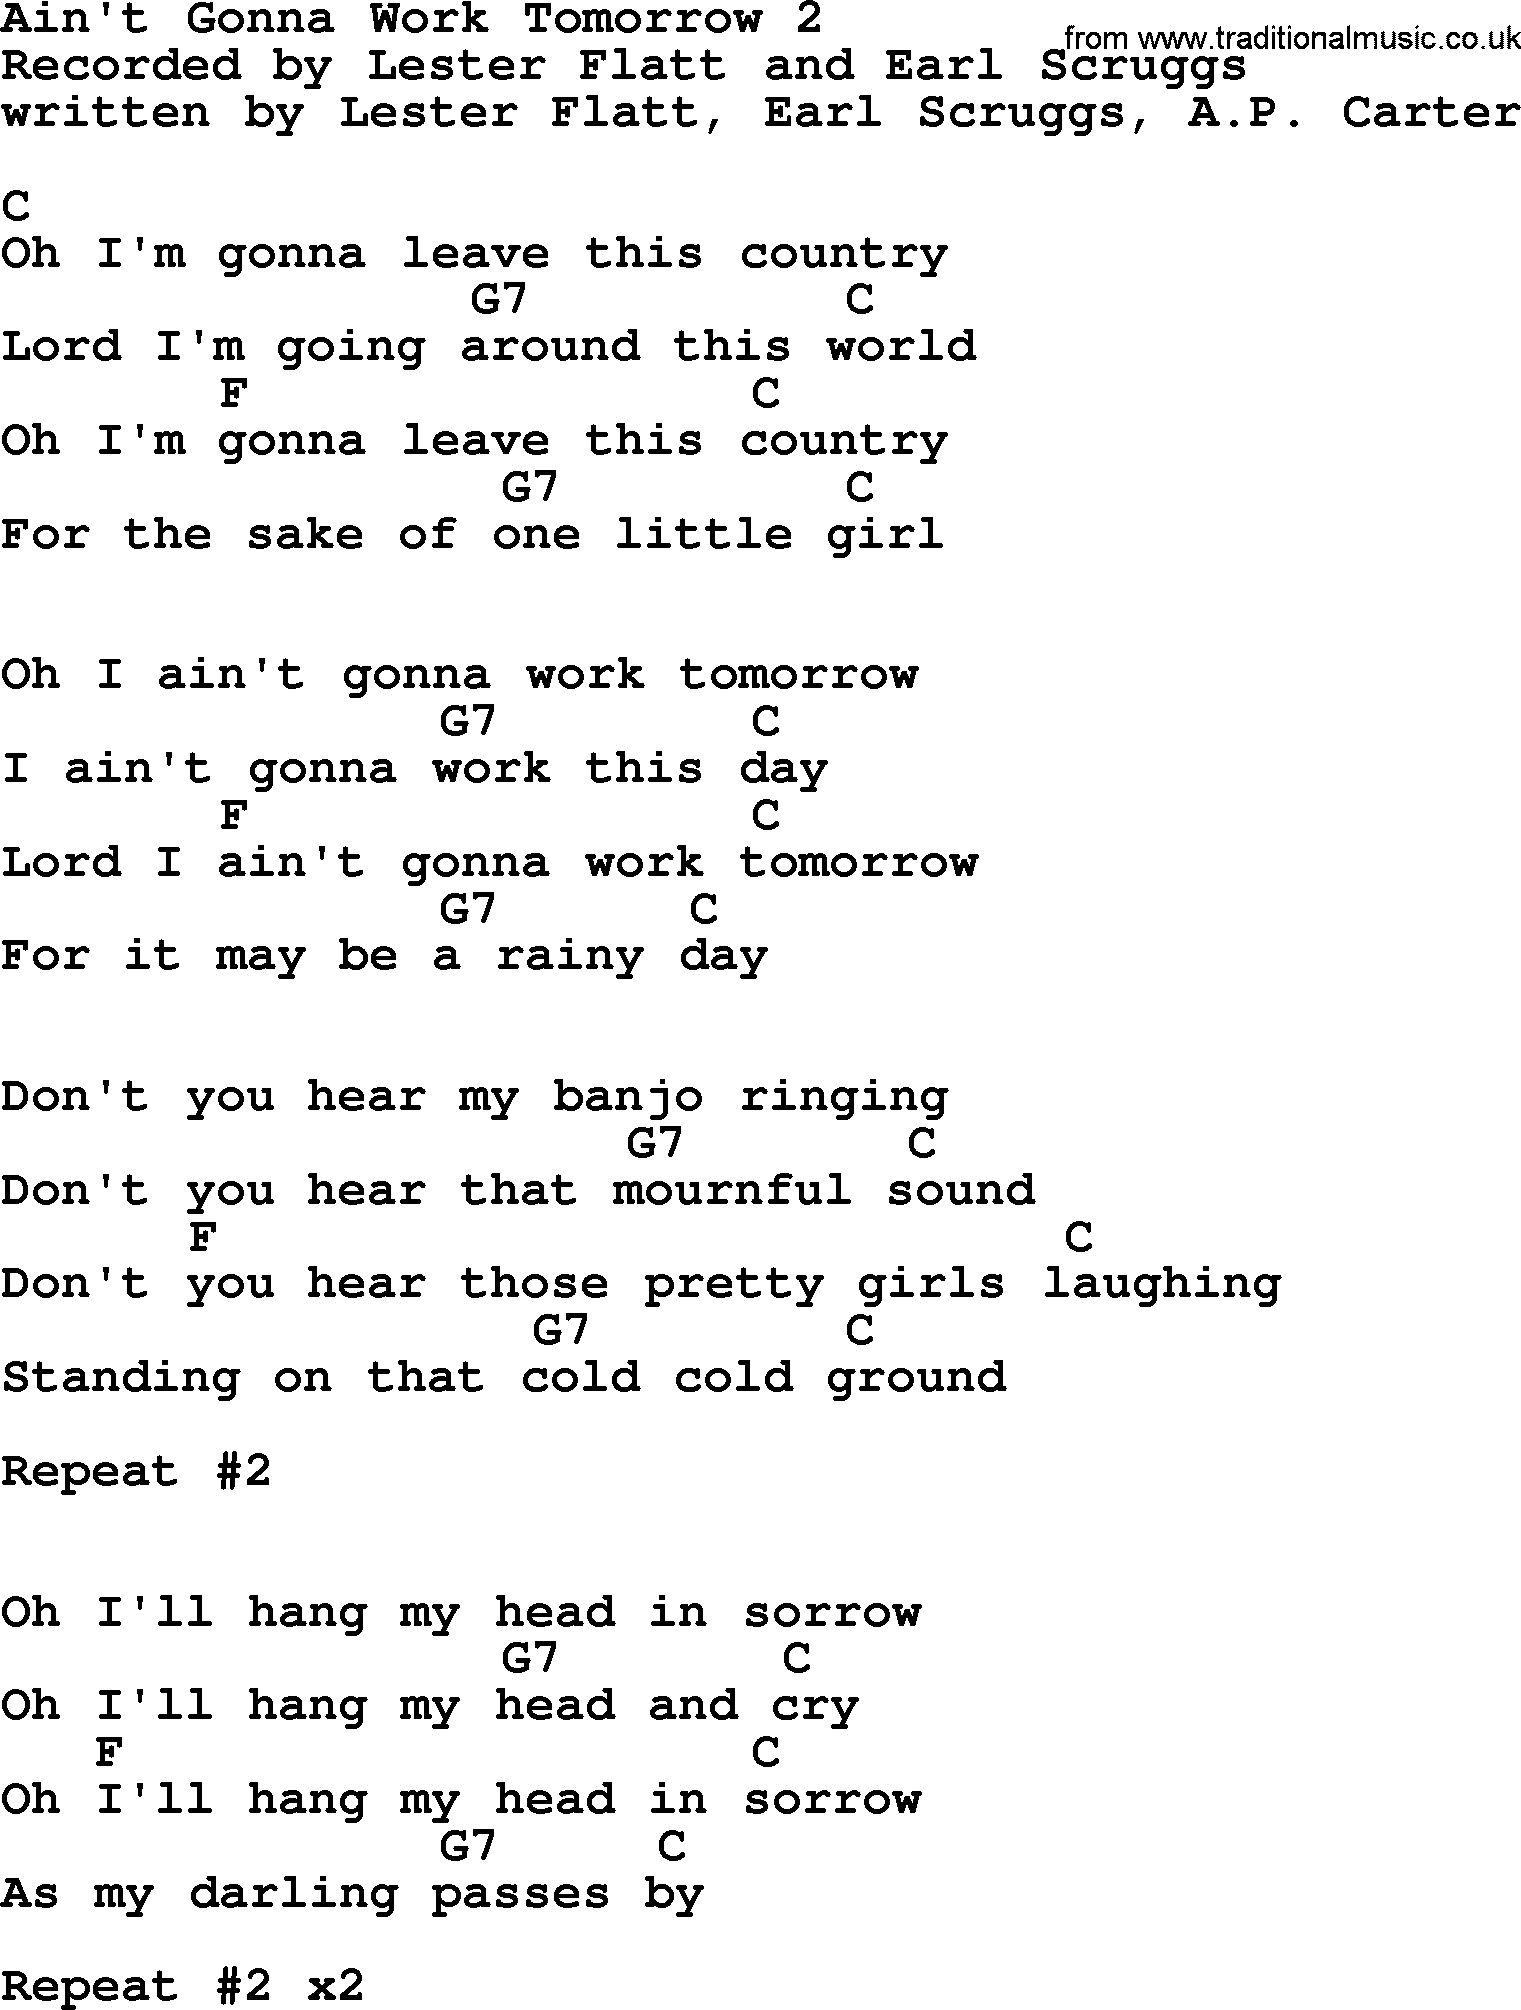 Bluegrass song: Ain't Gonna Work Tomorrow 2, lyrics and chords